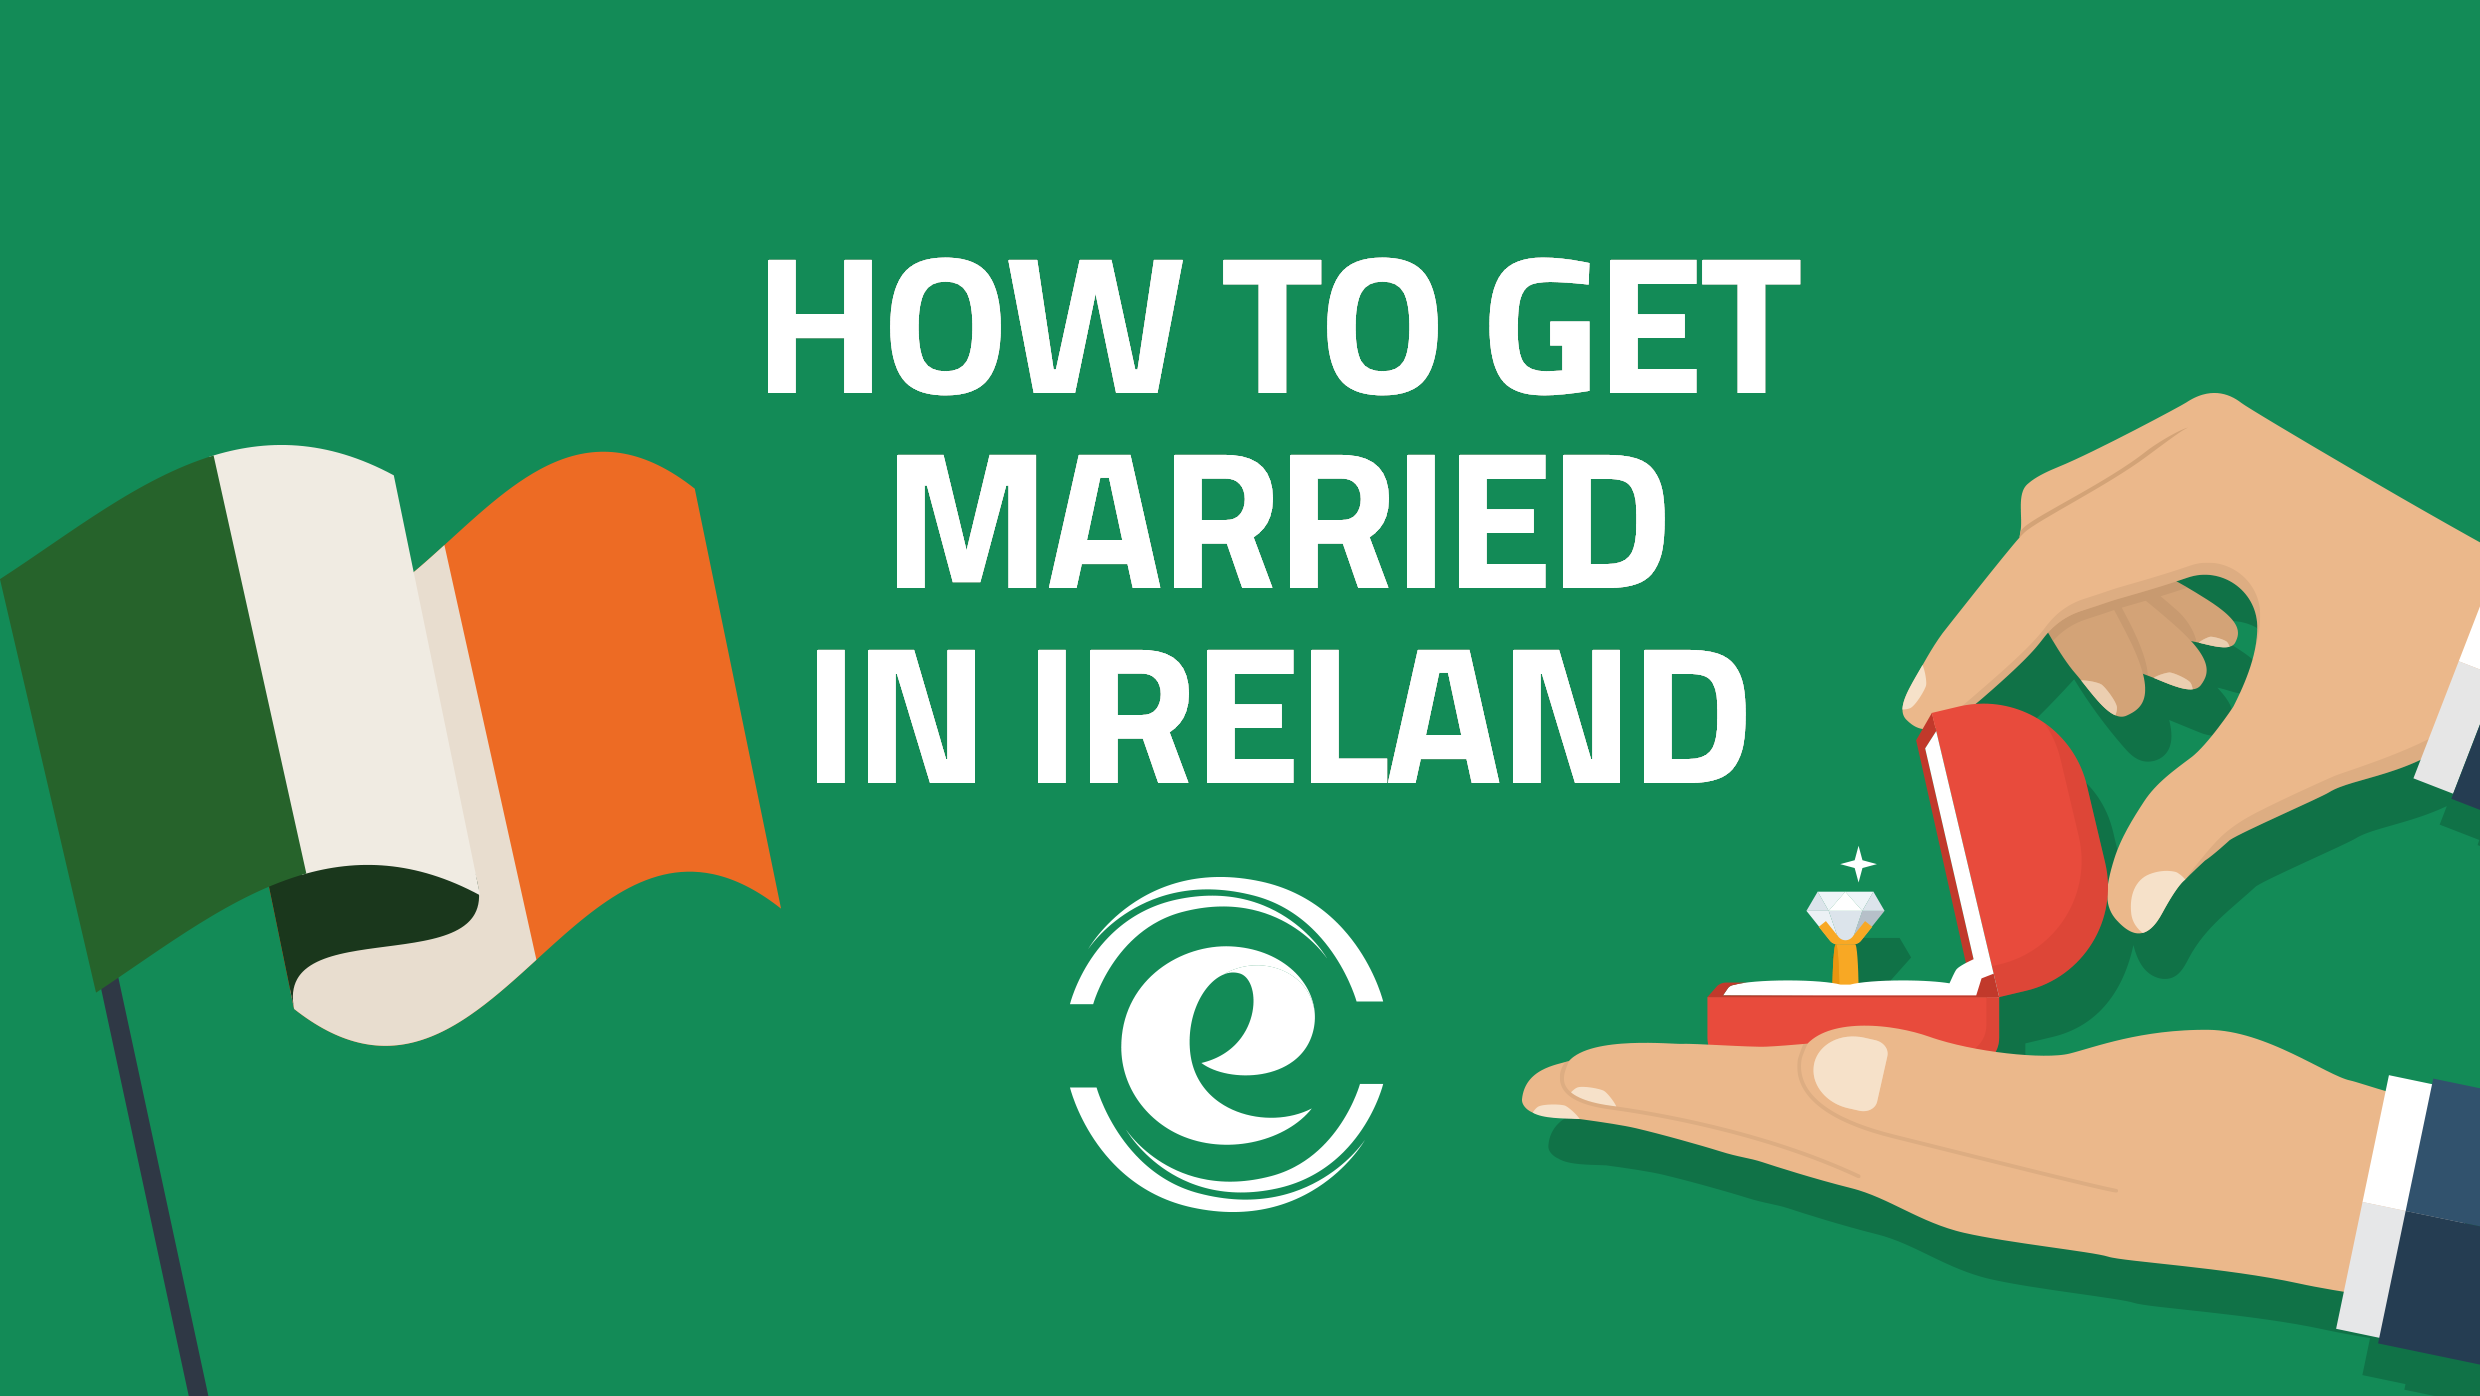 HOW TO GET MARRIED IN IRELAND